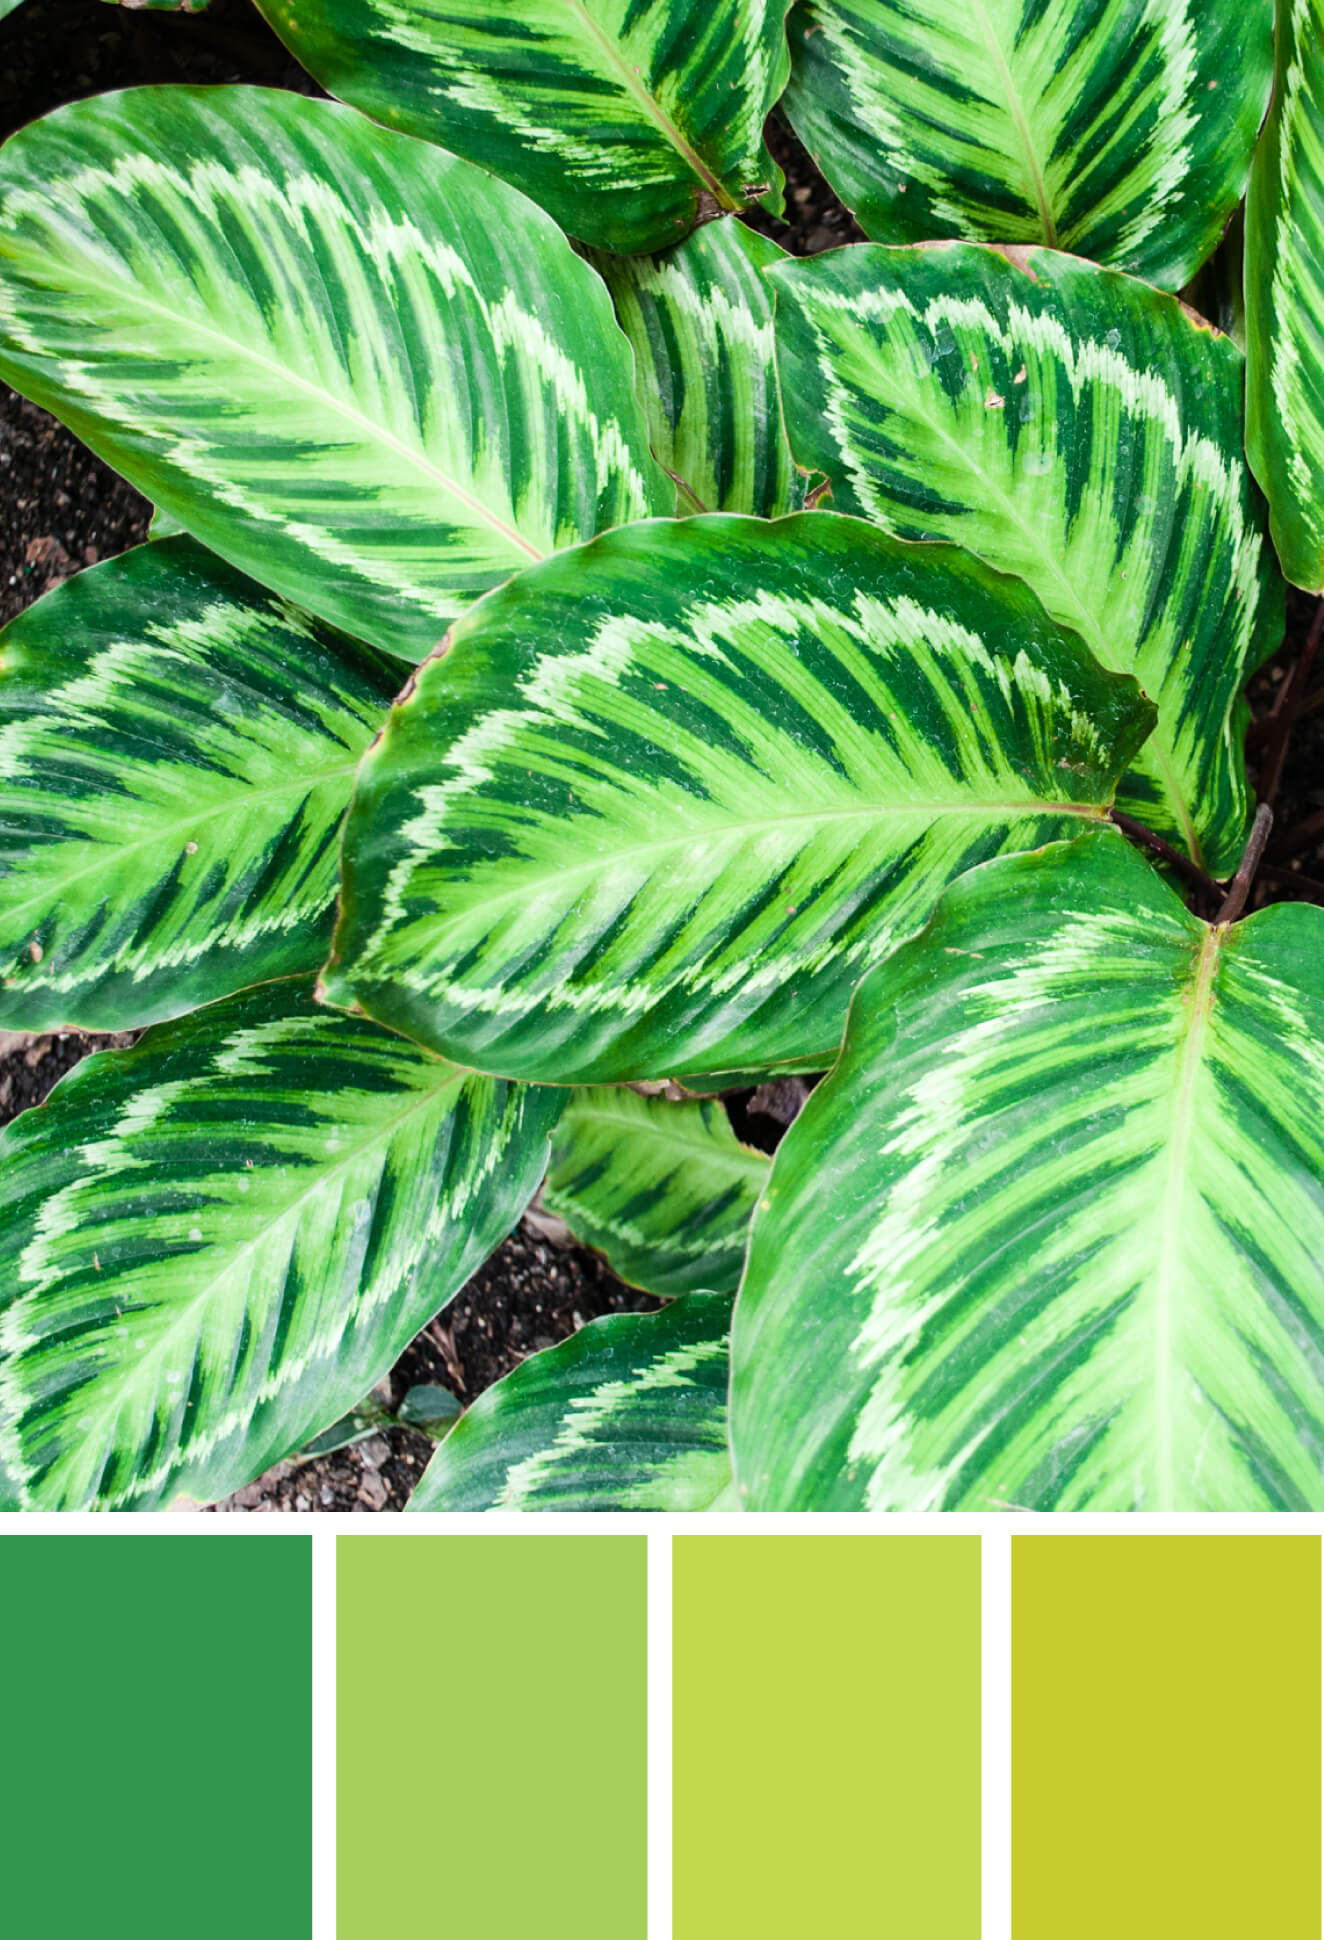 Color palette inspiration: Turning over a new leaf. Try this monochrome green color palette on your paper crafts, stationery, home decor, wreaths, and more #Colorize #ABColorPalette